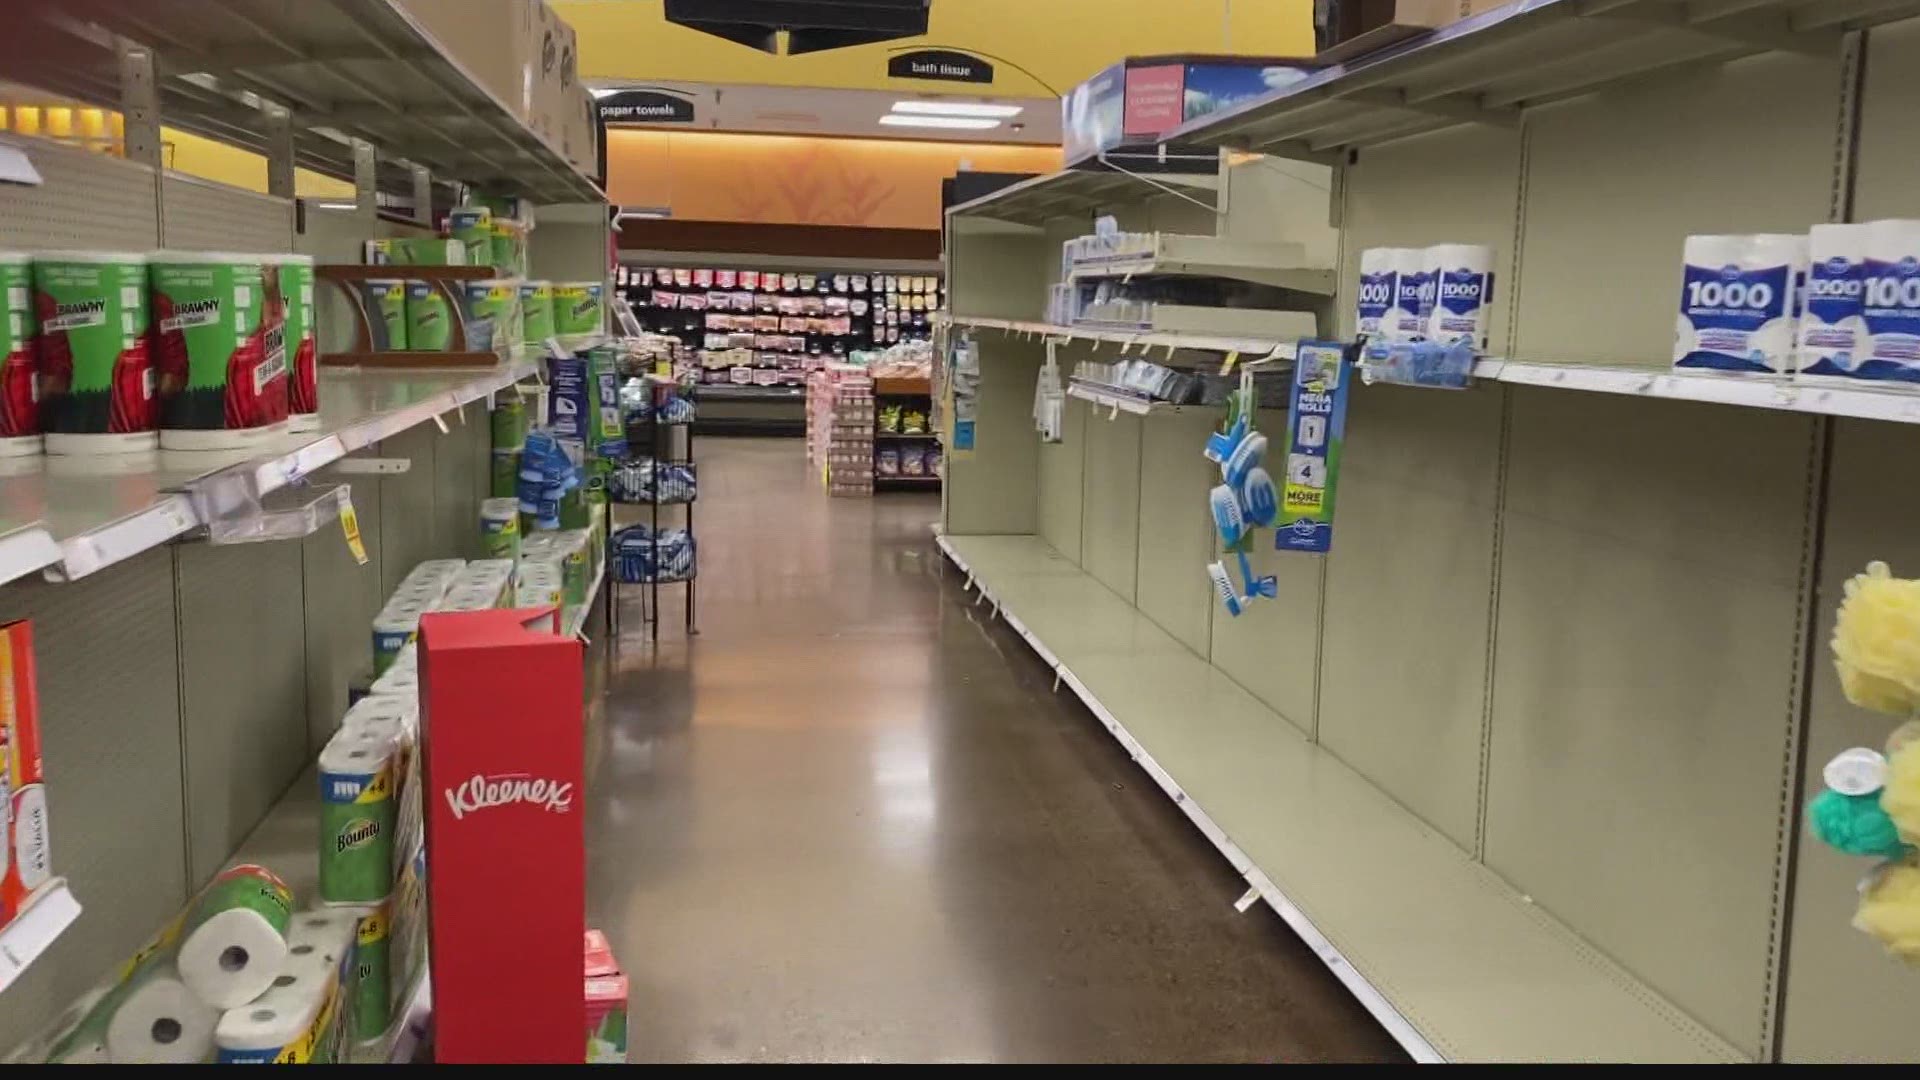 For at least the second time during this pandemic, we're seeing empty store shelves again all across central Indiana.